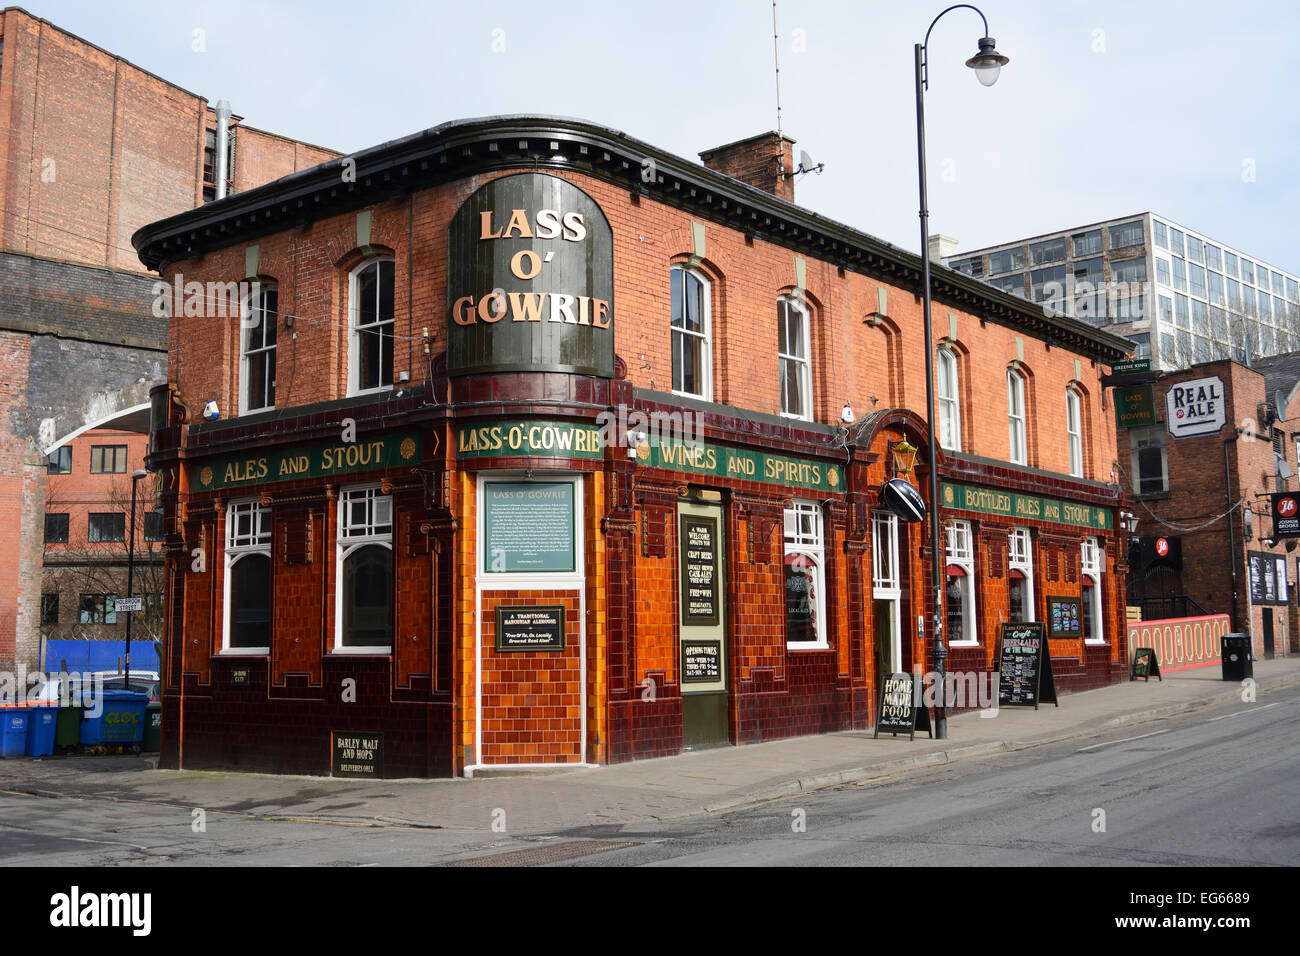 Lass-O-Gowrie - A historic  Manchester tiled public house which was named as Best British Pub in Britain 2012. Stock Photo